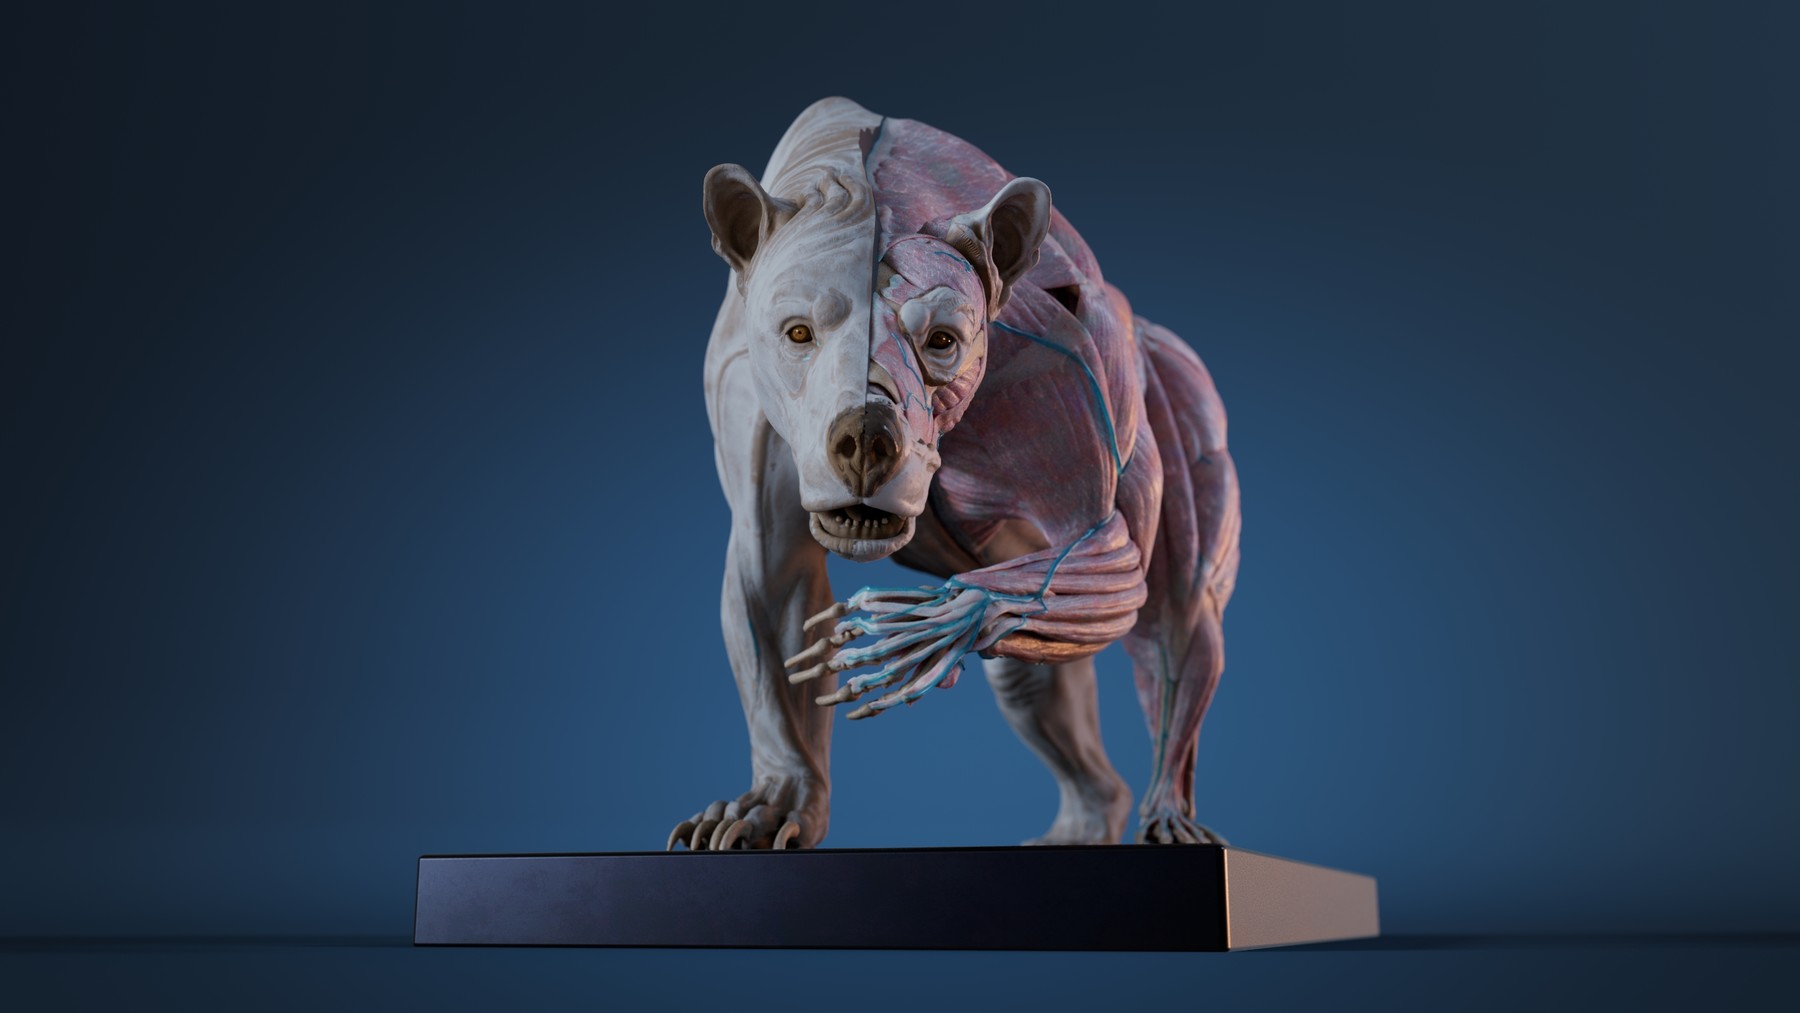 ArtStation - Digital Grizzly bear anatomy Atlas for Artists | Resources